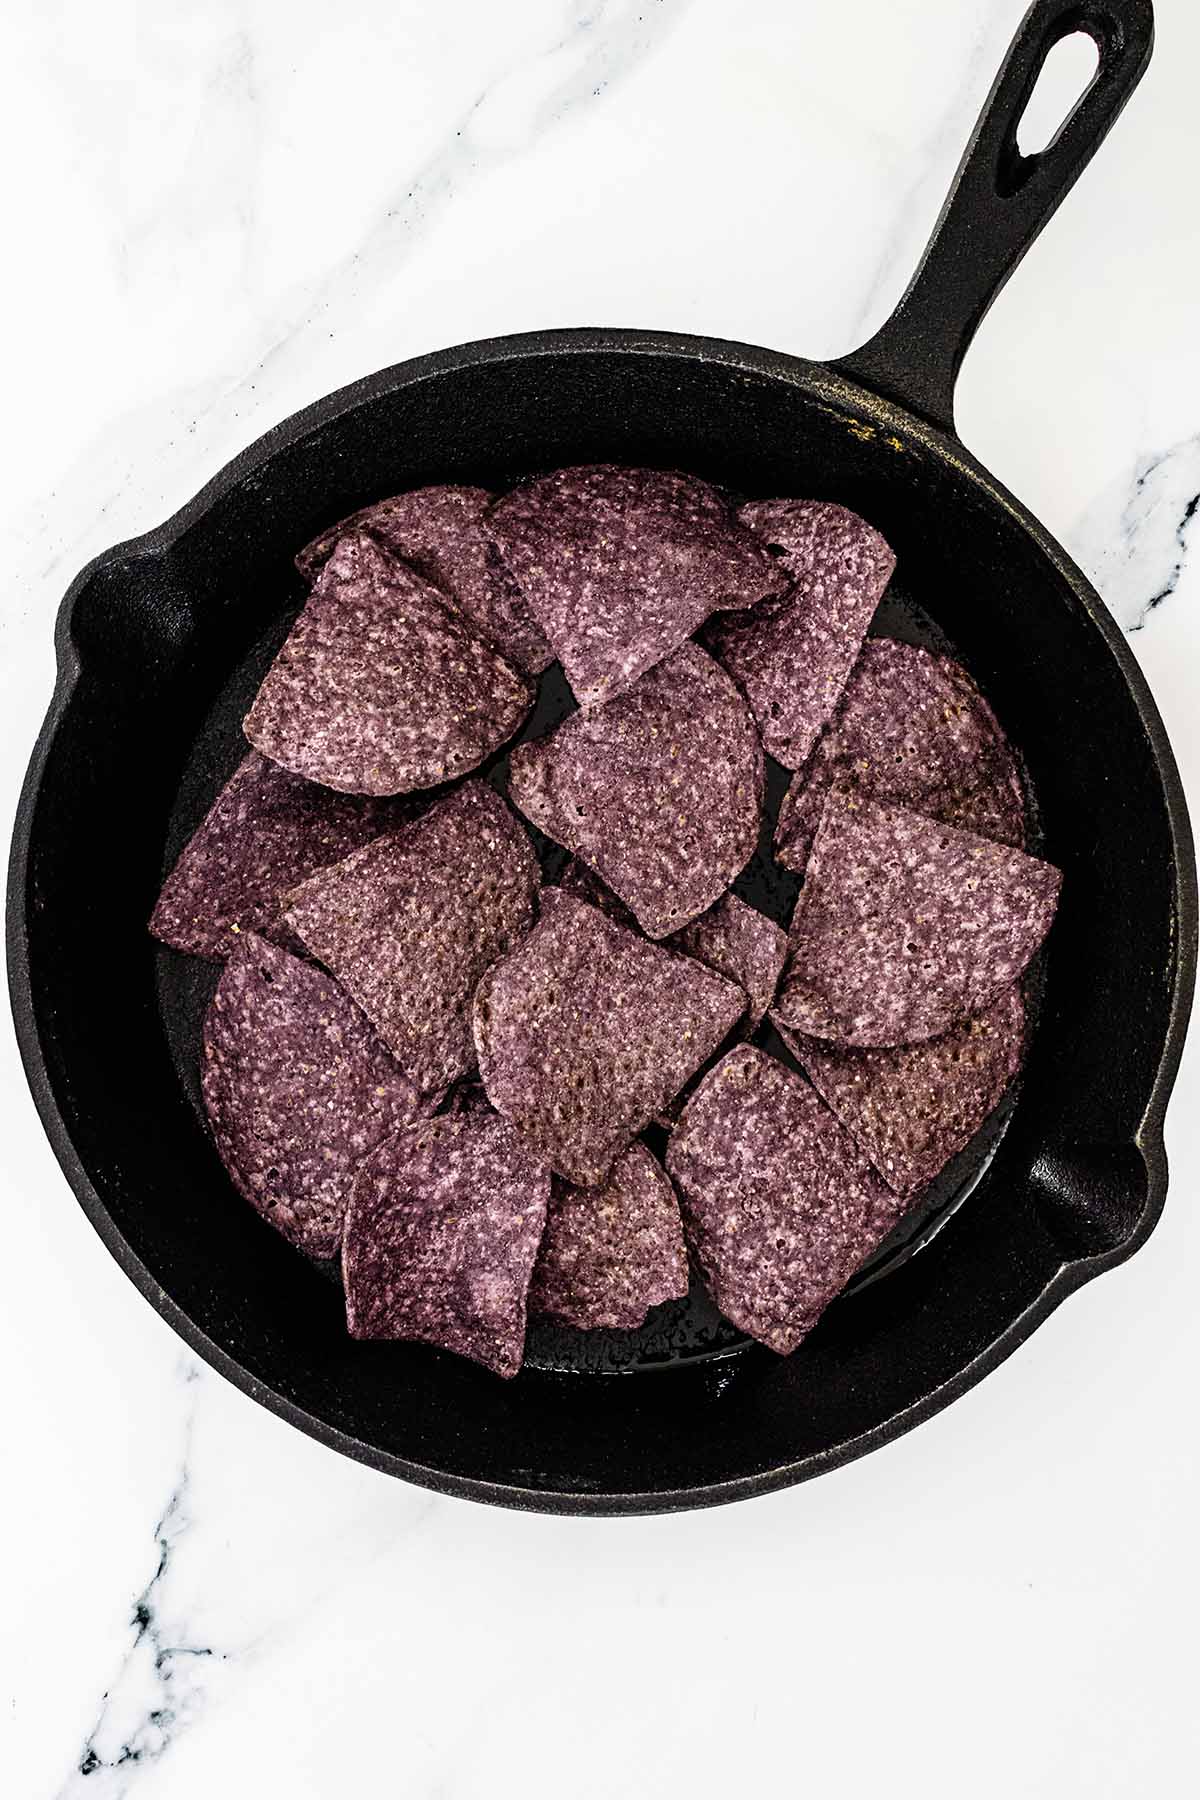 Overhead view of blue corn tortilla chips added to a cast iron skillet on a white marble background.